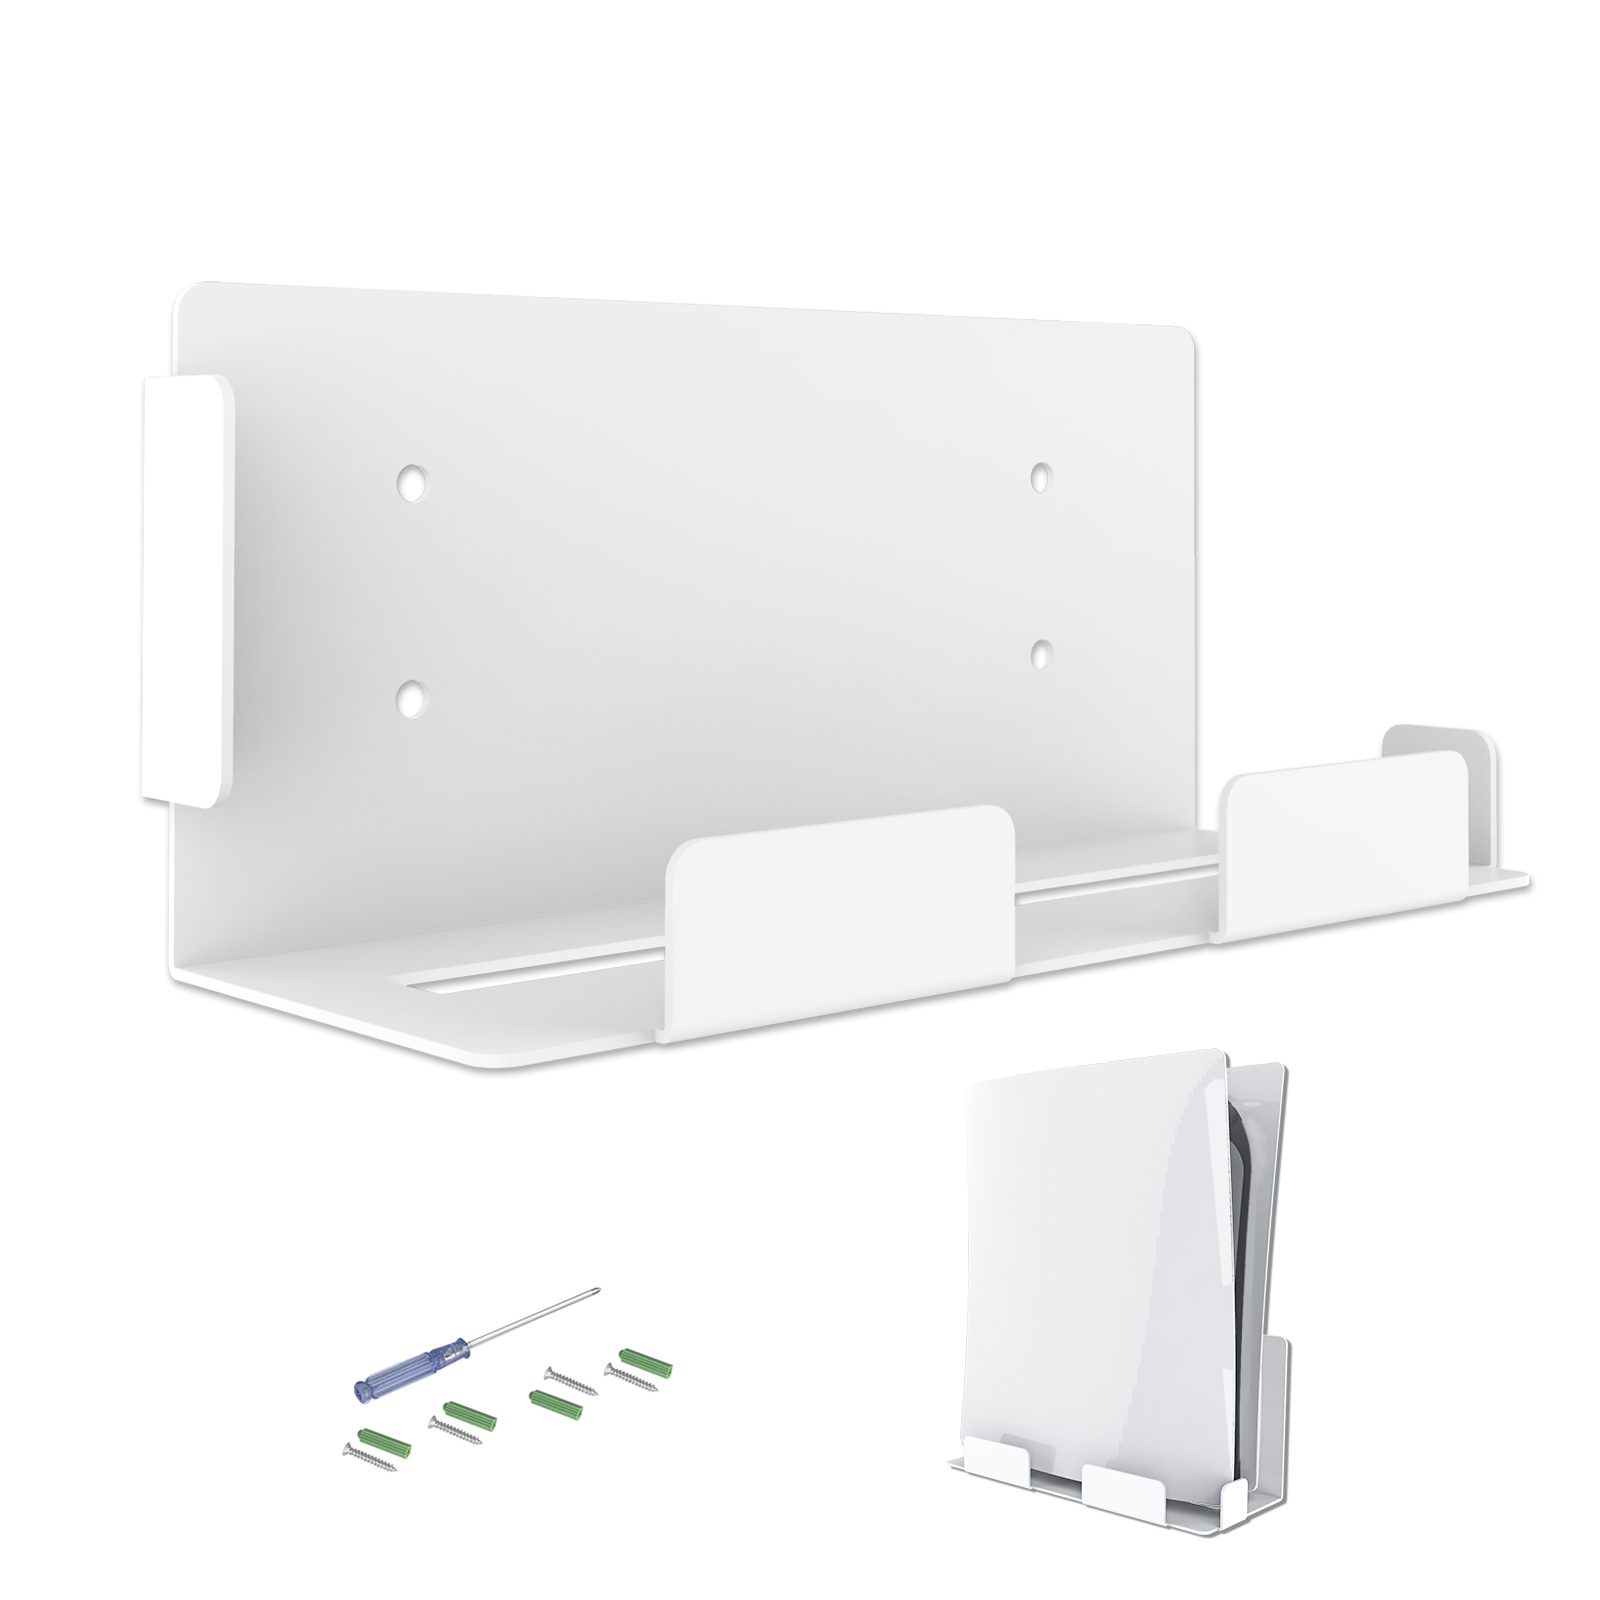 PS5 console wall mount comes with a screwdriver and four sets of screws for secure installation.